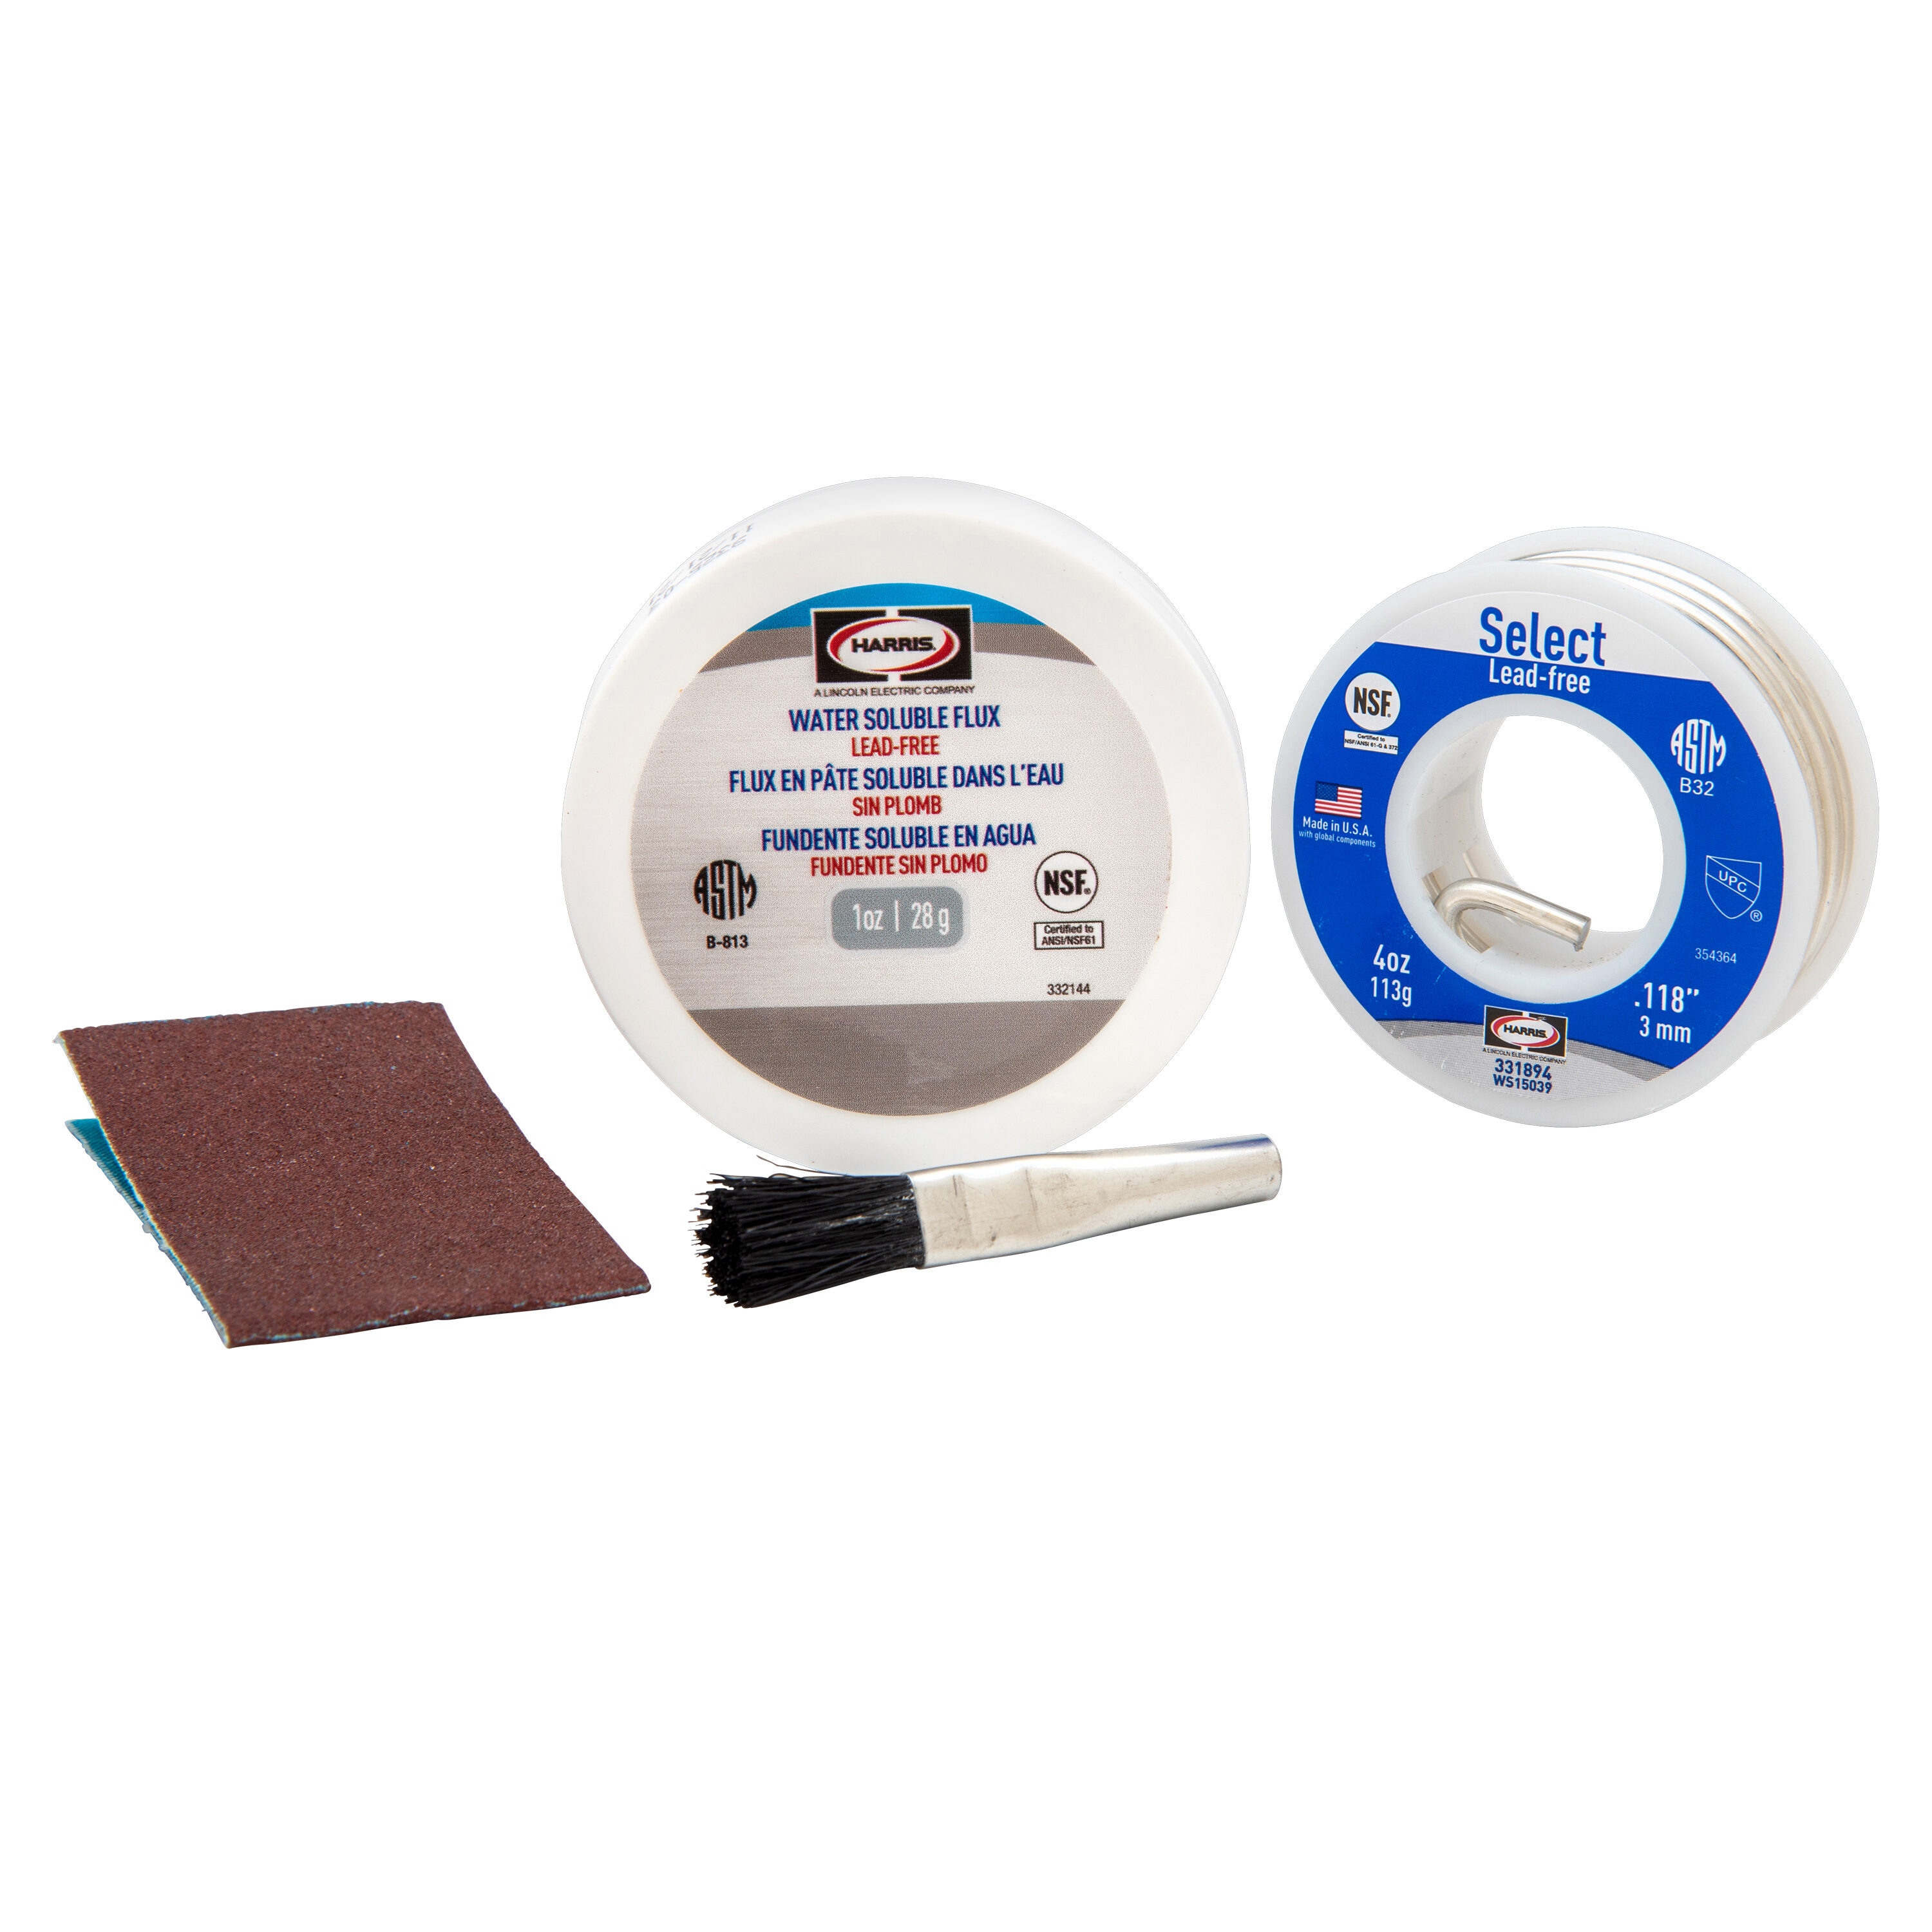 Harris Products Group 8 oz. Lead-Free General Metal Solder in the Solder  department at